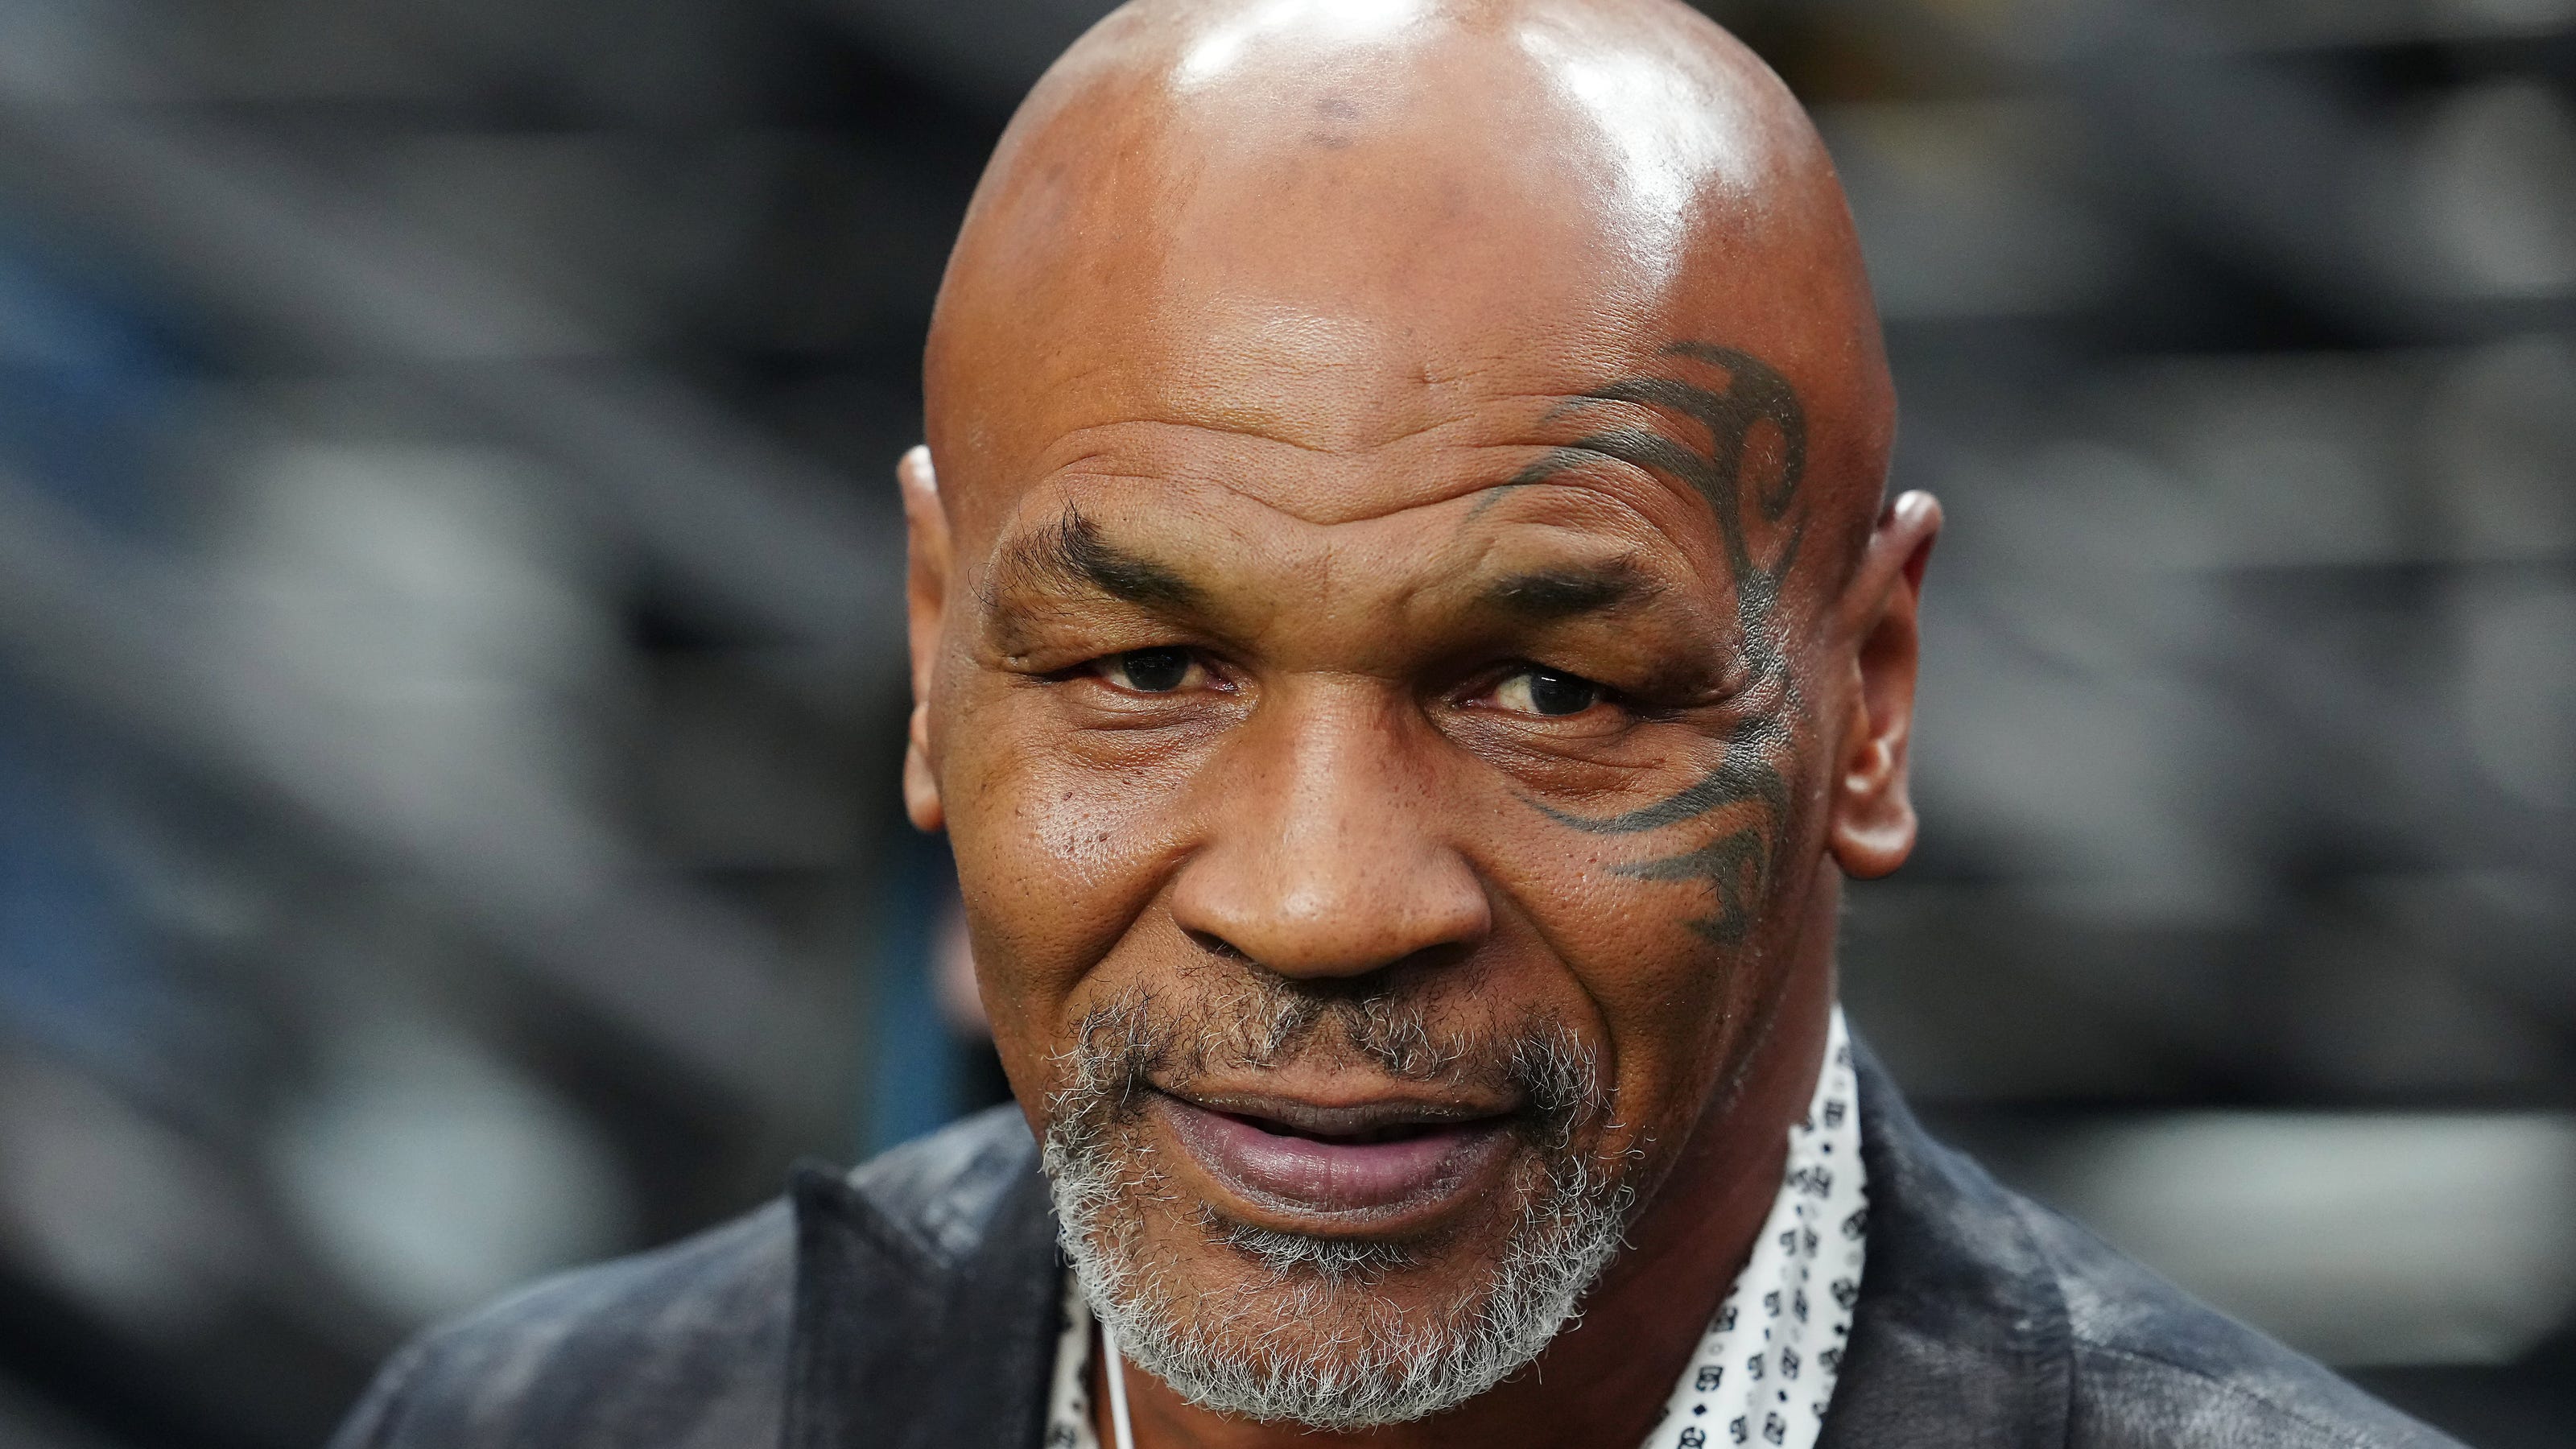 Mike Tyson facing health risks as he trains with an ulcer, doctors say. Should he fight?